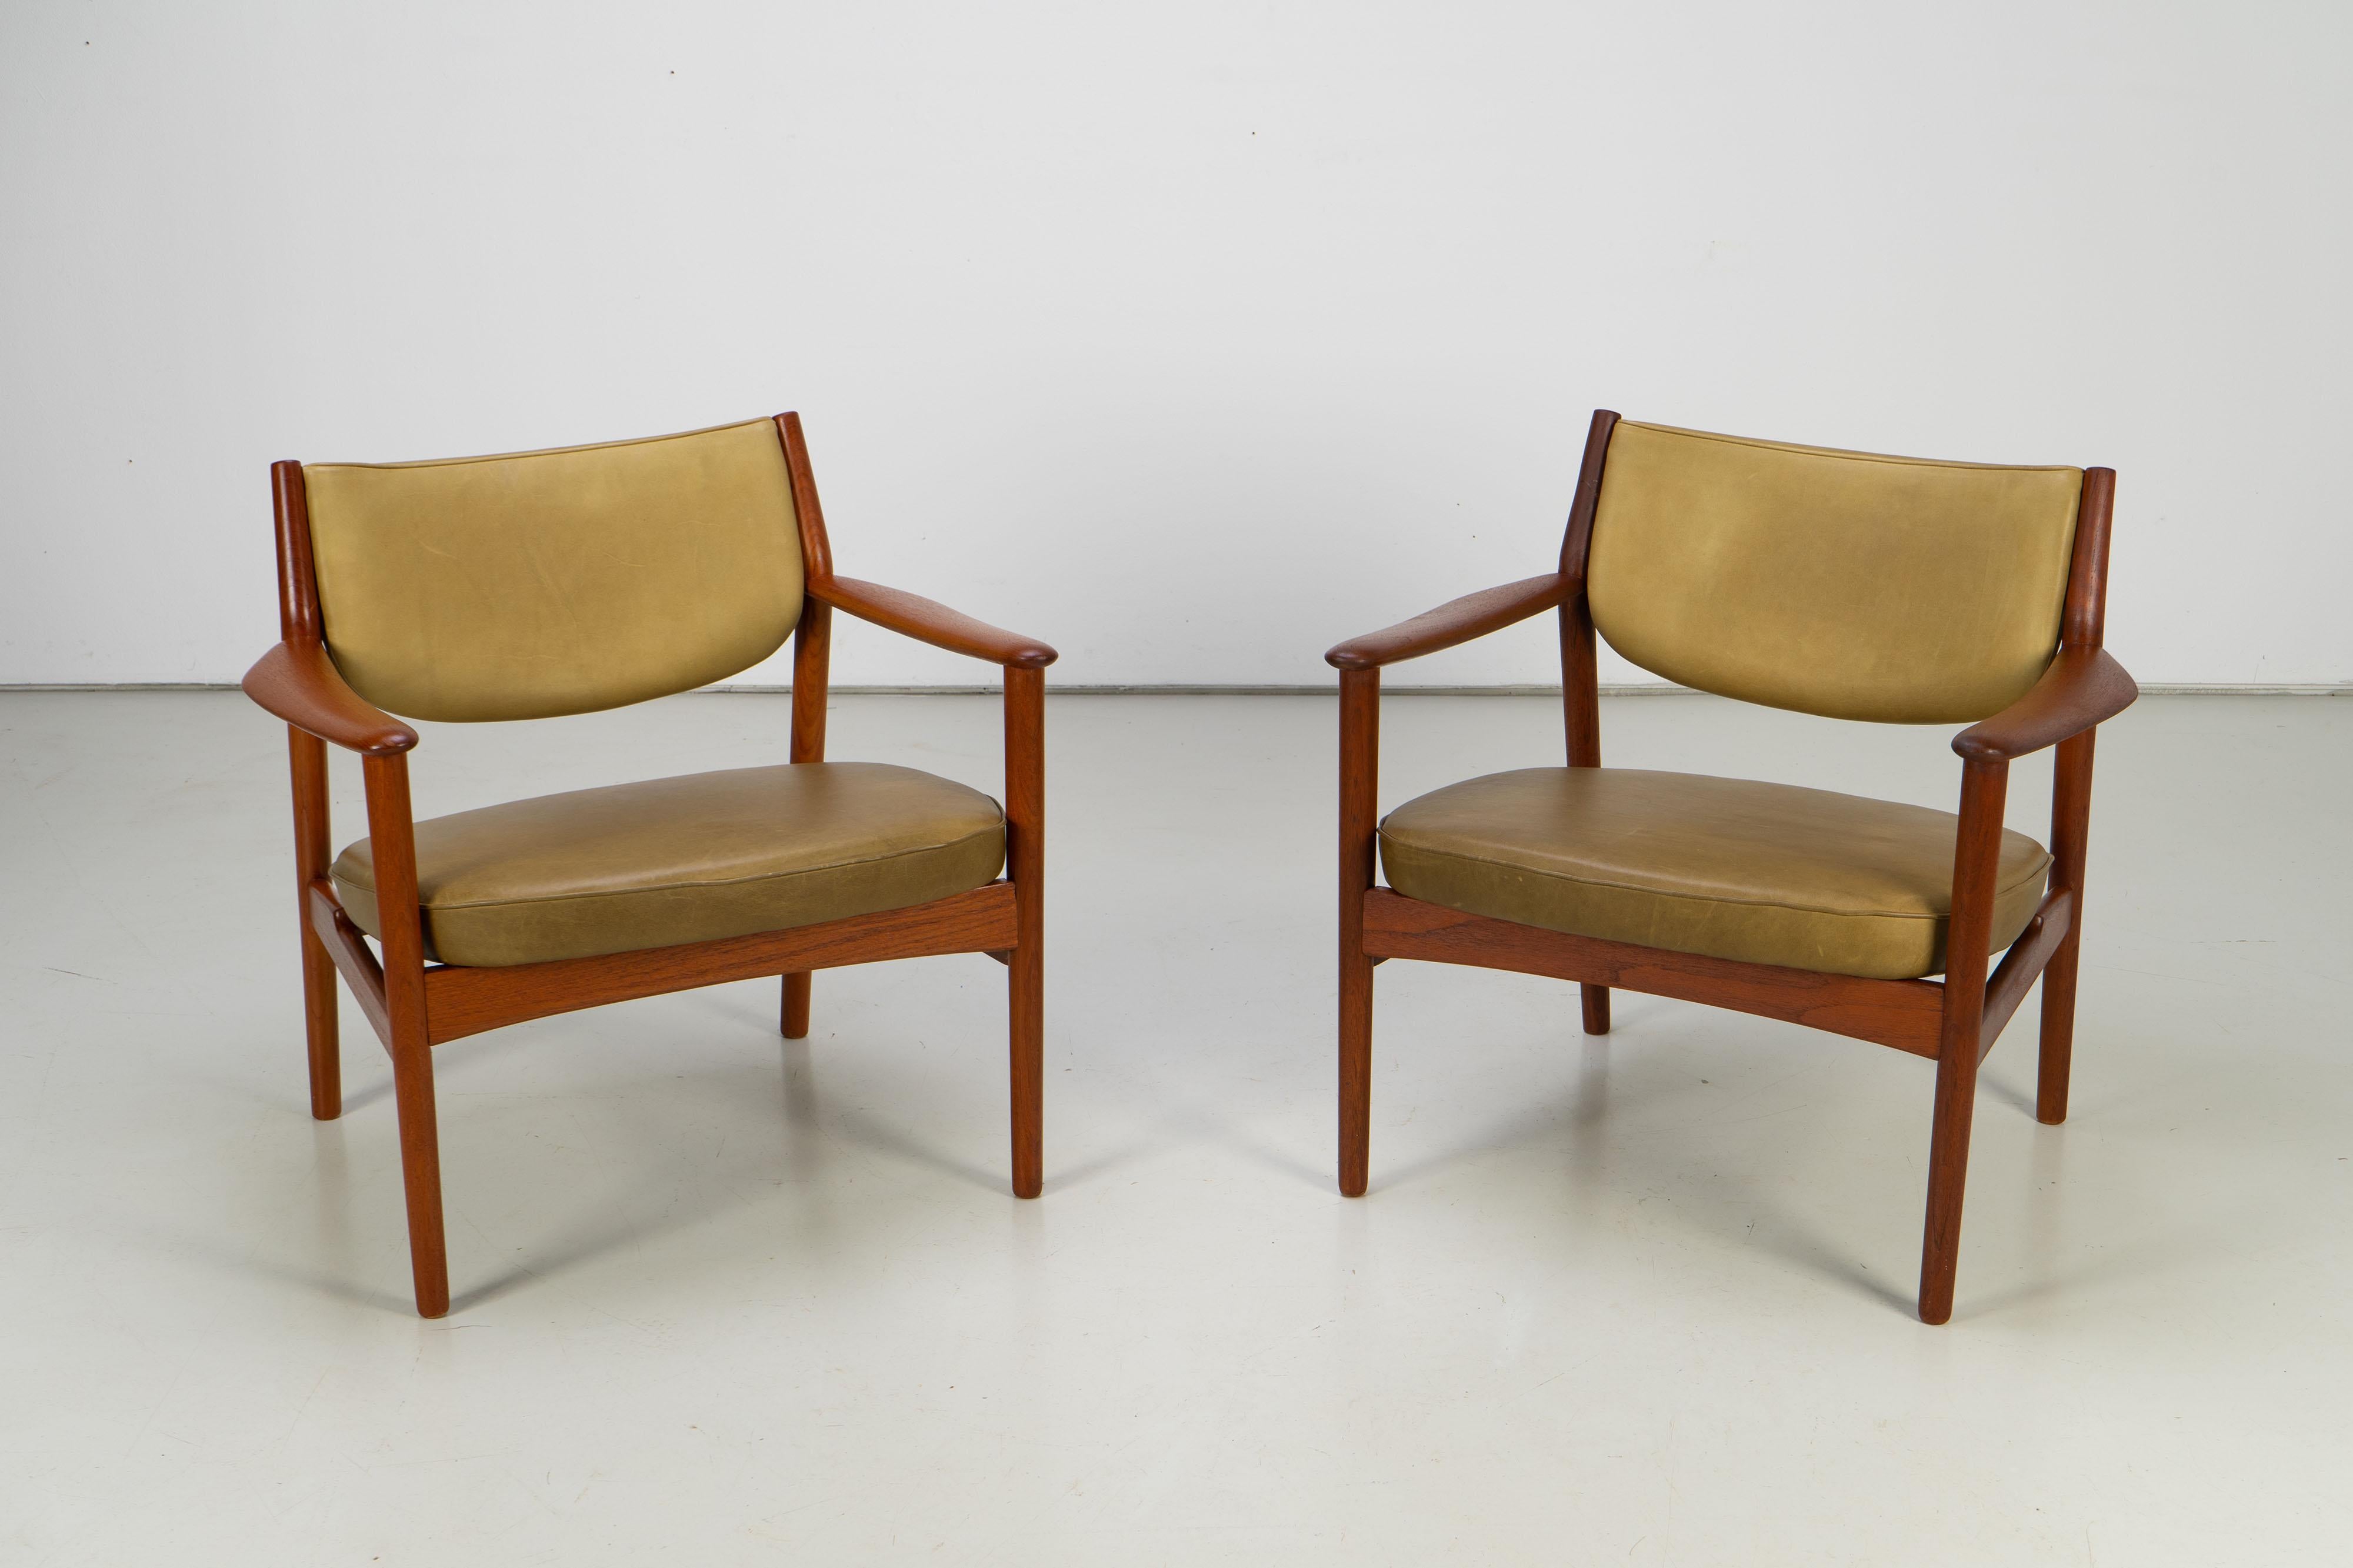 Scandinavian Modern Pair of Scandinavian Easy Chairs with Teak and Leather by Westnofa, 1960s For Sale